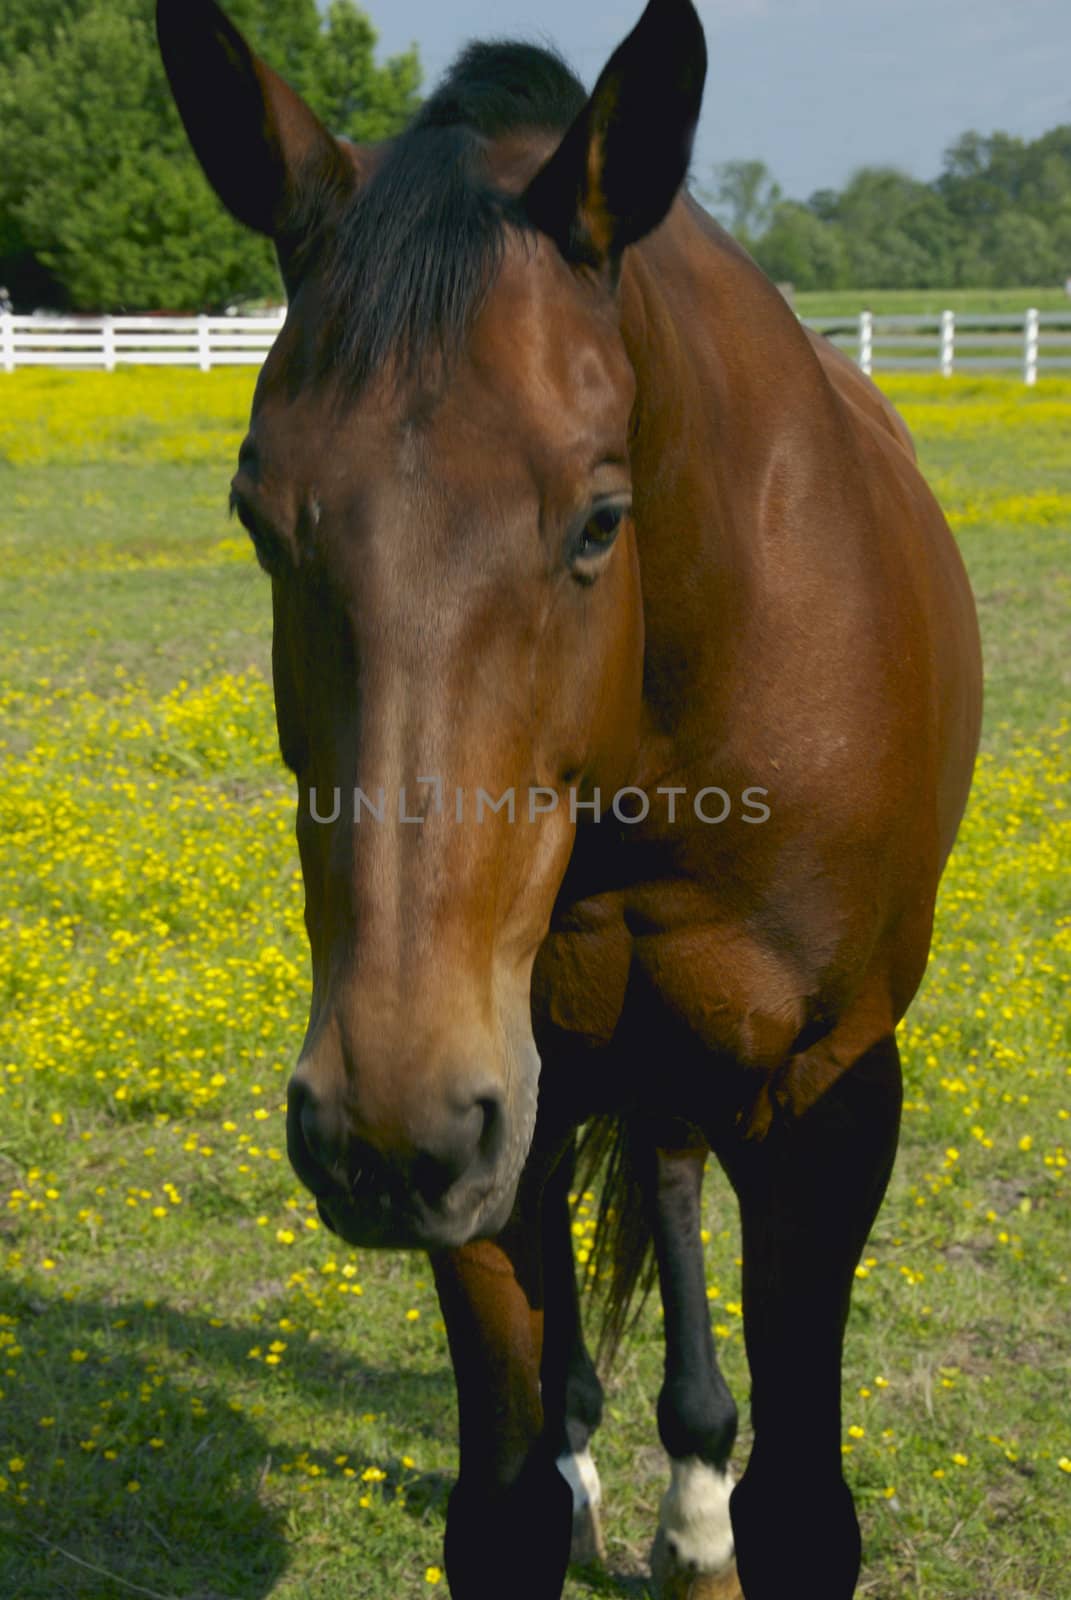 A brown horse in a buttercup field meadow with a white fence